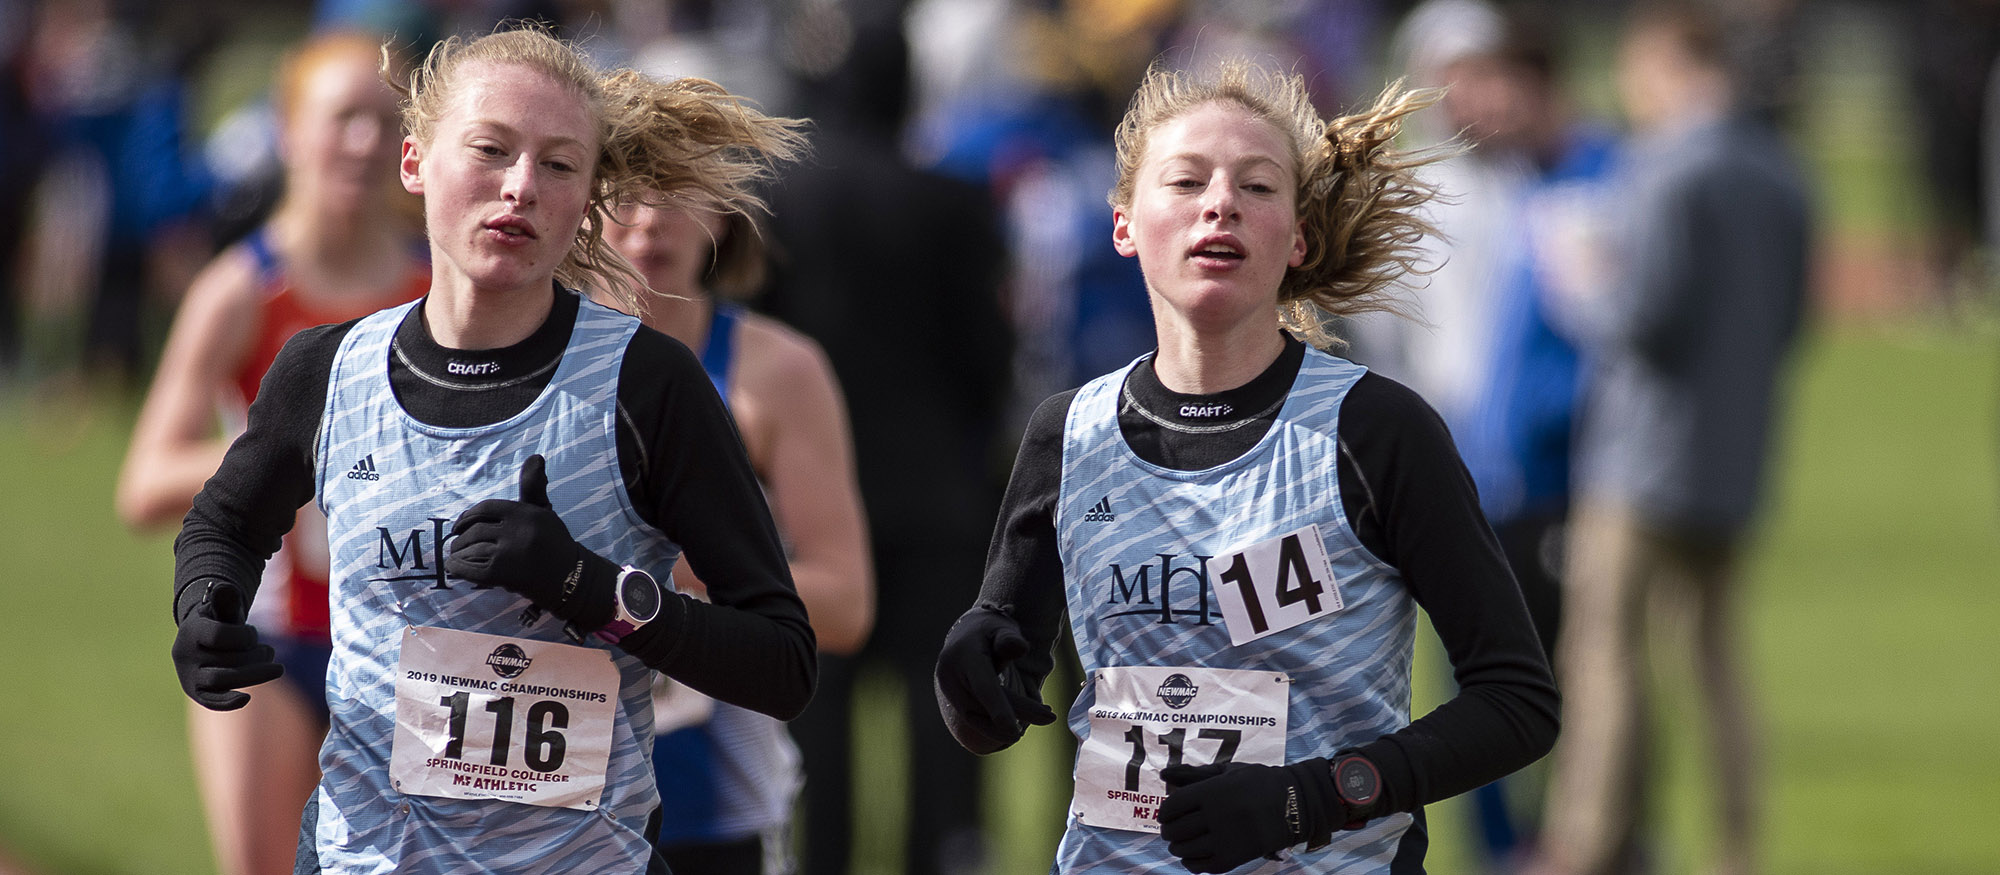 Action photo of Hannah and Madeline Rieders in the 10,000-meter run at the 2019 NEWMAC Championships. Photo courtesy of Frank Poulin.